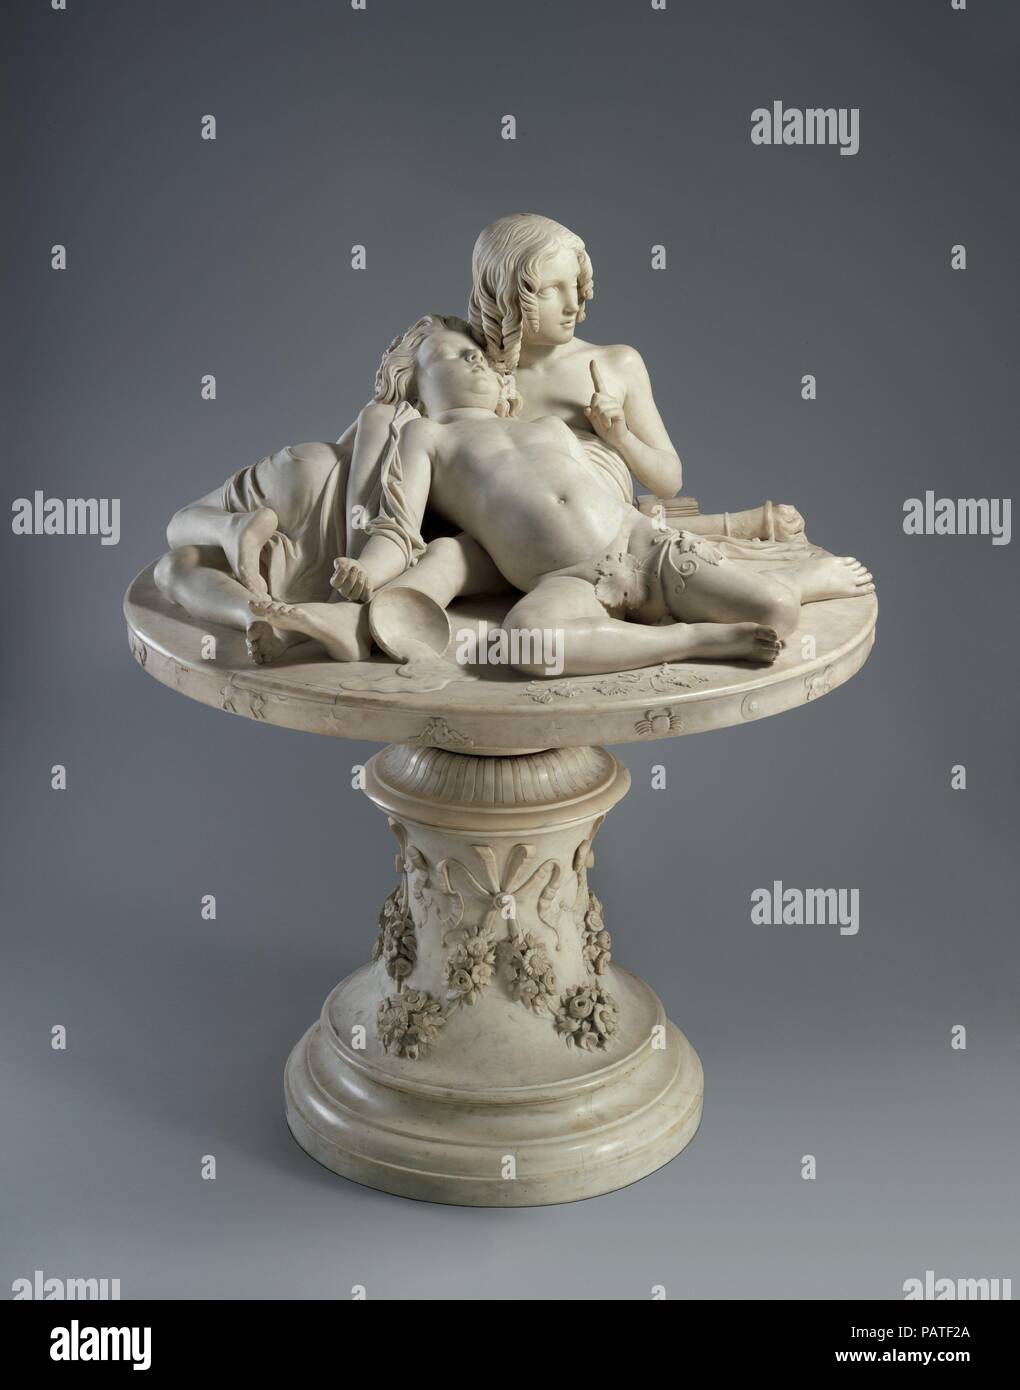 The Demidoff Table. Artist: Lorenzo Bartolini (Italian, 1777-1850). Culture: Italian, Florence. Dimensions: Overall (confirmed): H. 64 3/8 x W. 51 1/4 x Diam. 49 3/4 x in. (163.5 x 130.2 x 126.4 cm). Patron: Commissioned by Prince Anatole Demidov (1845-1870). Date: 1845.  Commissioned by Count Anatoly Nicolaevich Demidoff. The subject is a complex, cosmological allegory best described in the sculptor's own words: 'Stretched out upon the plan of the world is Cupid, god of generation, sustaining and watching over the symbolic genius of dissolute wealth without virtue, who snores in his sleep . . Stock Photo